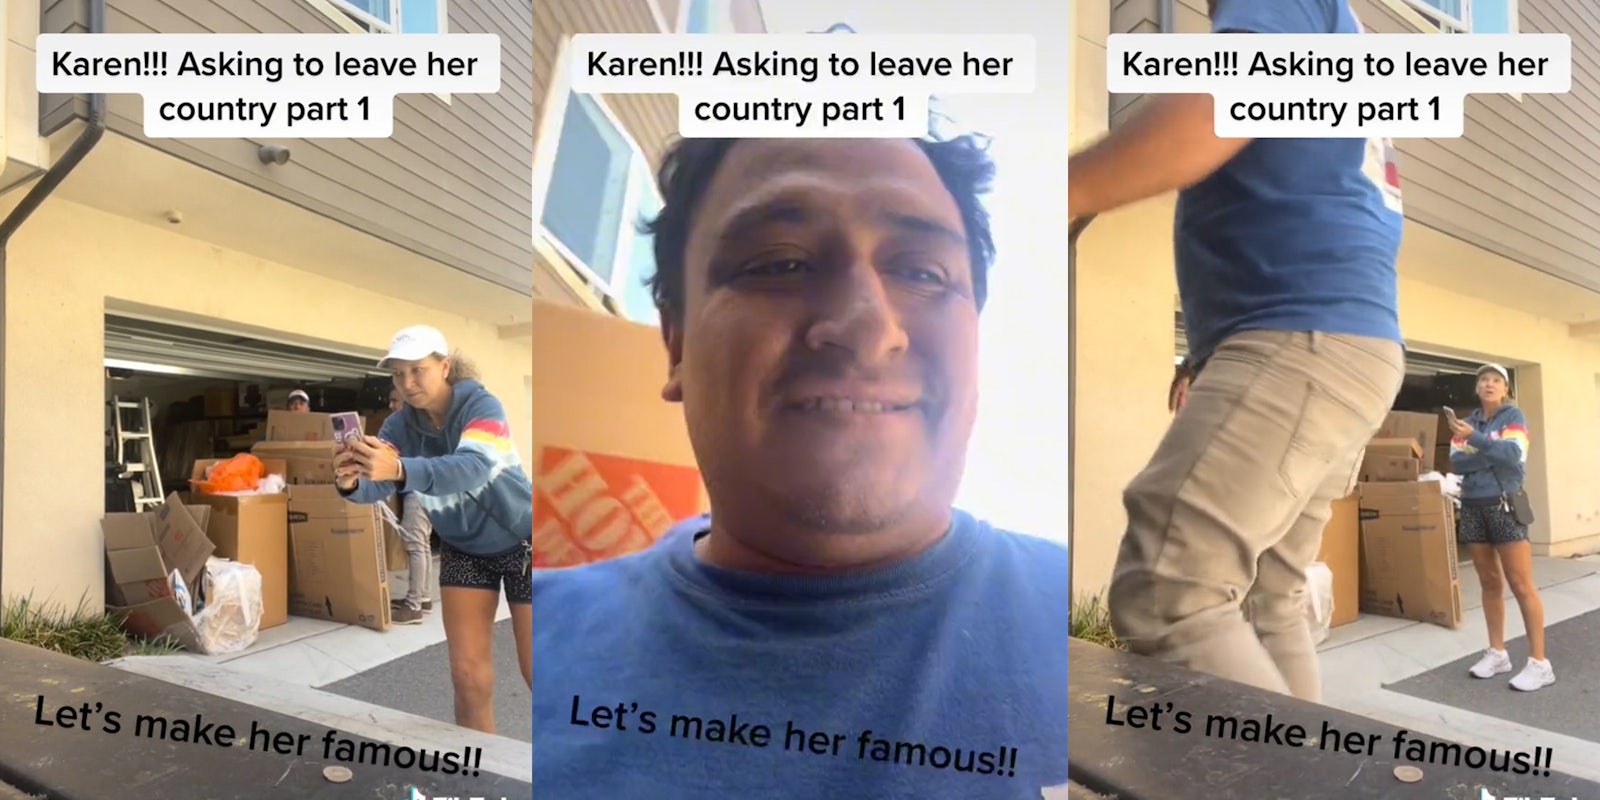 woman taking a picture with cardboard boxes in background (l) man smiling (c) woman standing behind man with phone in hand (r) all with captions 'Karen!!! Asking to leave her country part 1' and 'Let's make her famous!!'